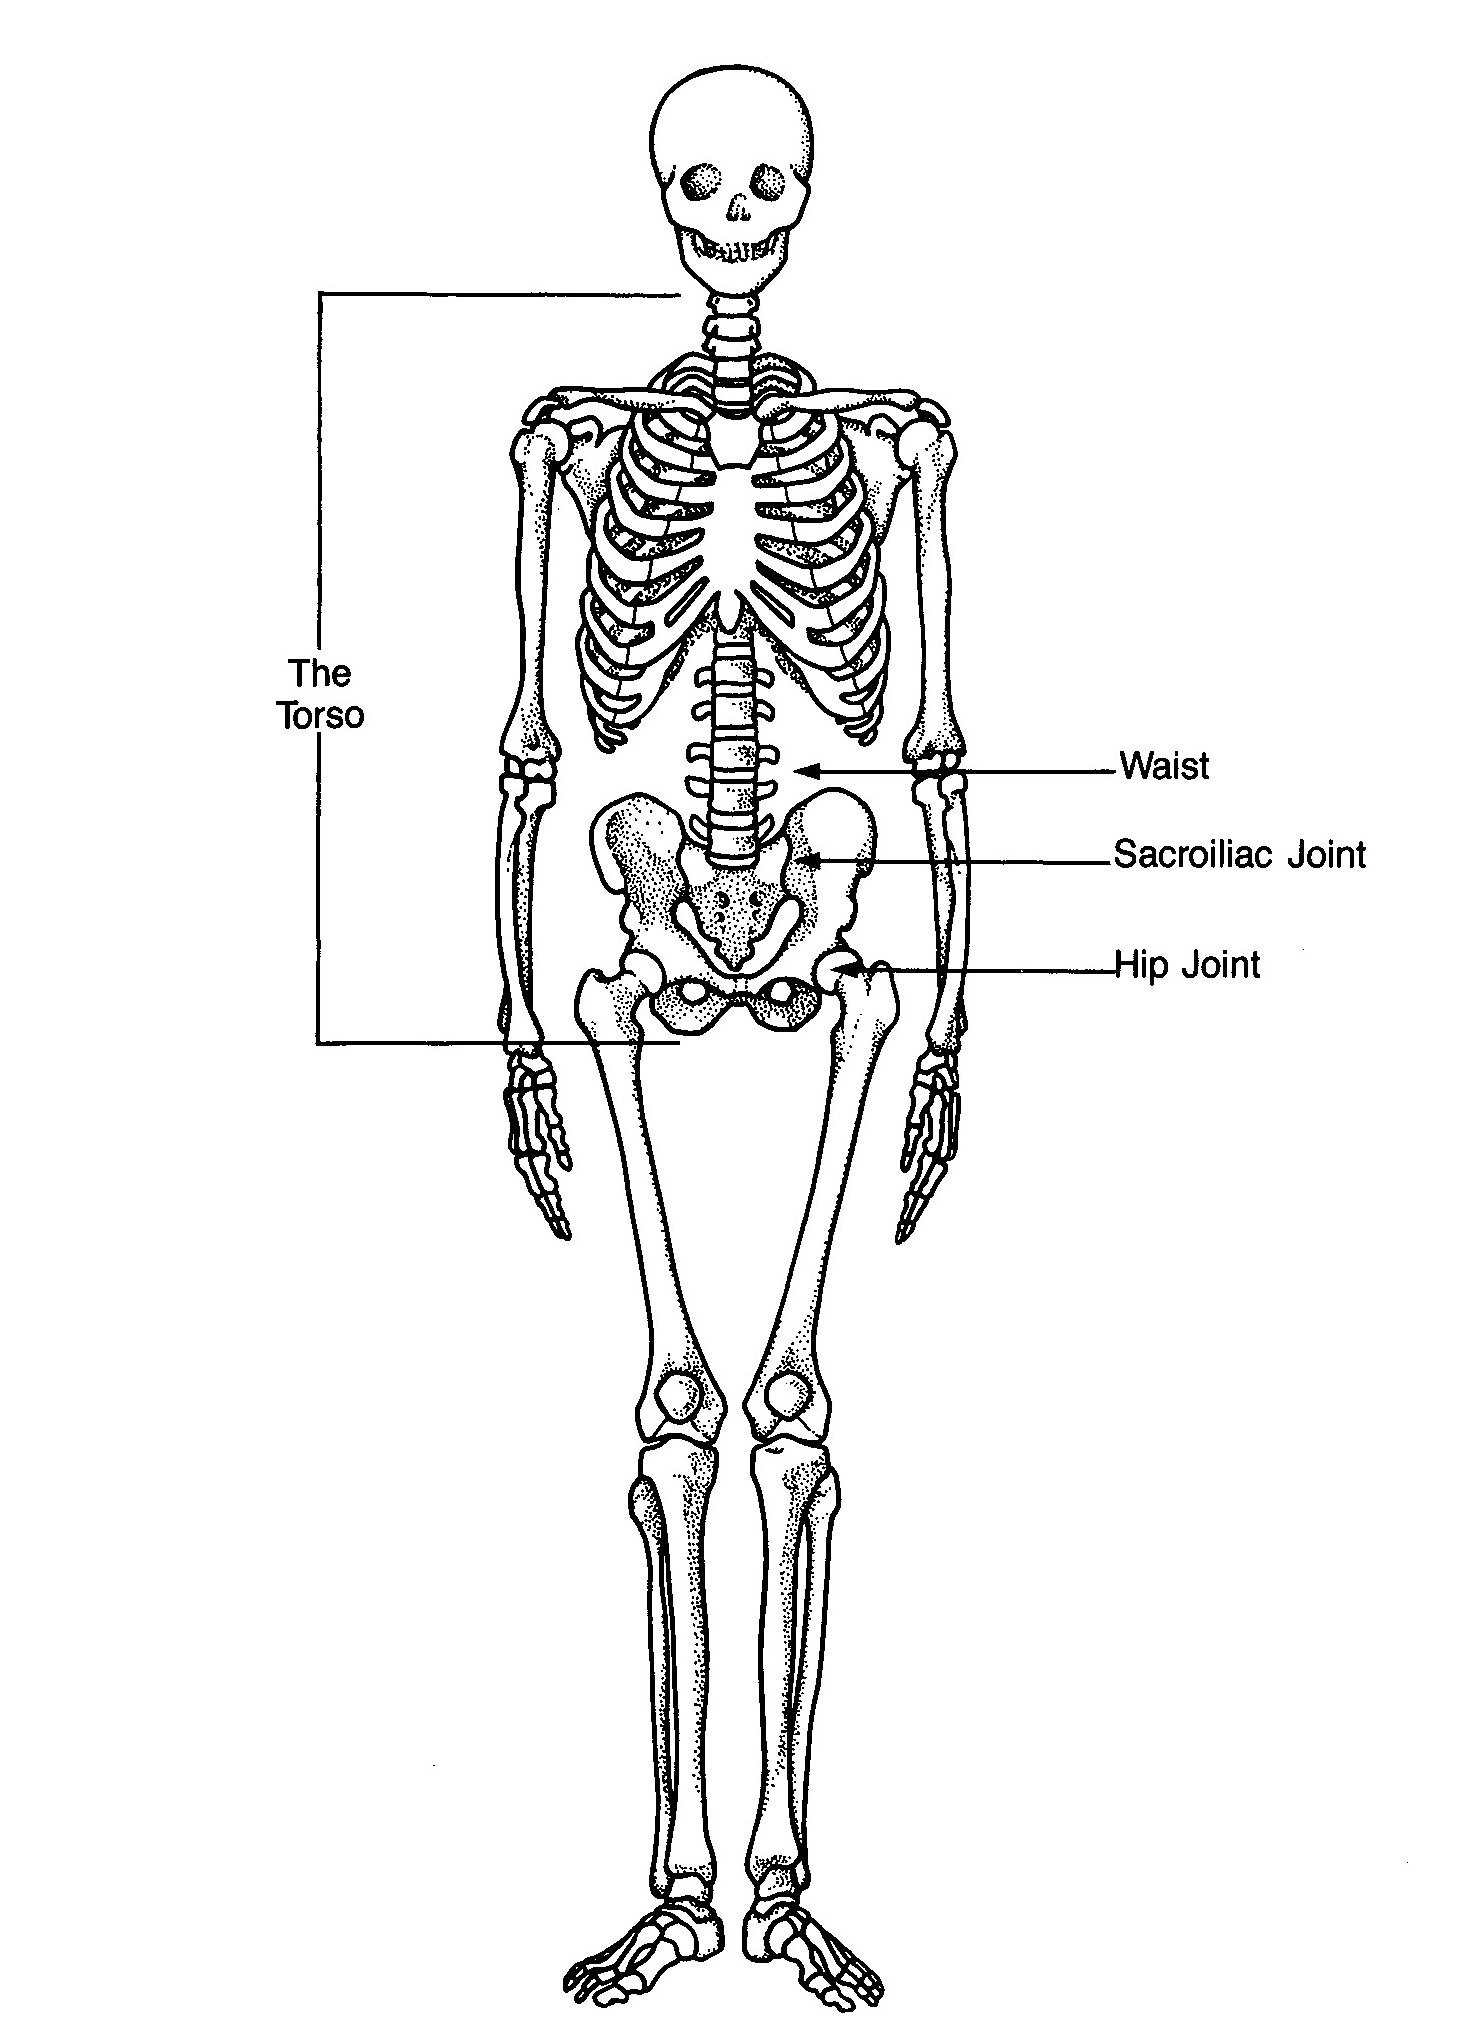 Skeleton as viewed from teh front showing the locatin of the waist vs the hip joints